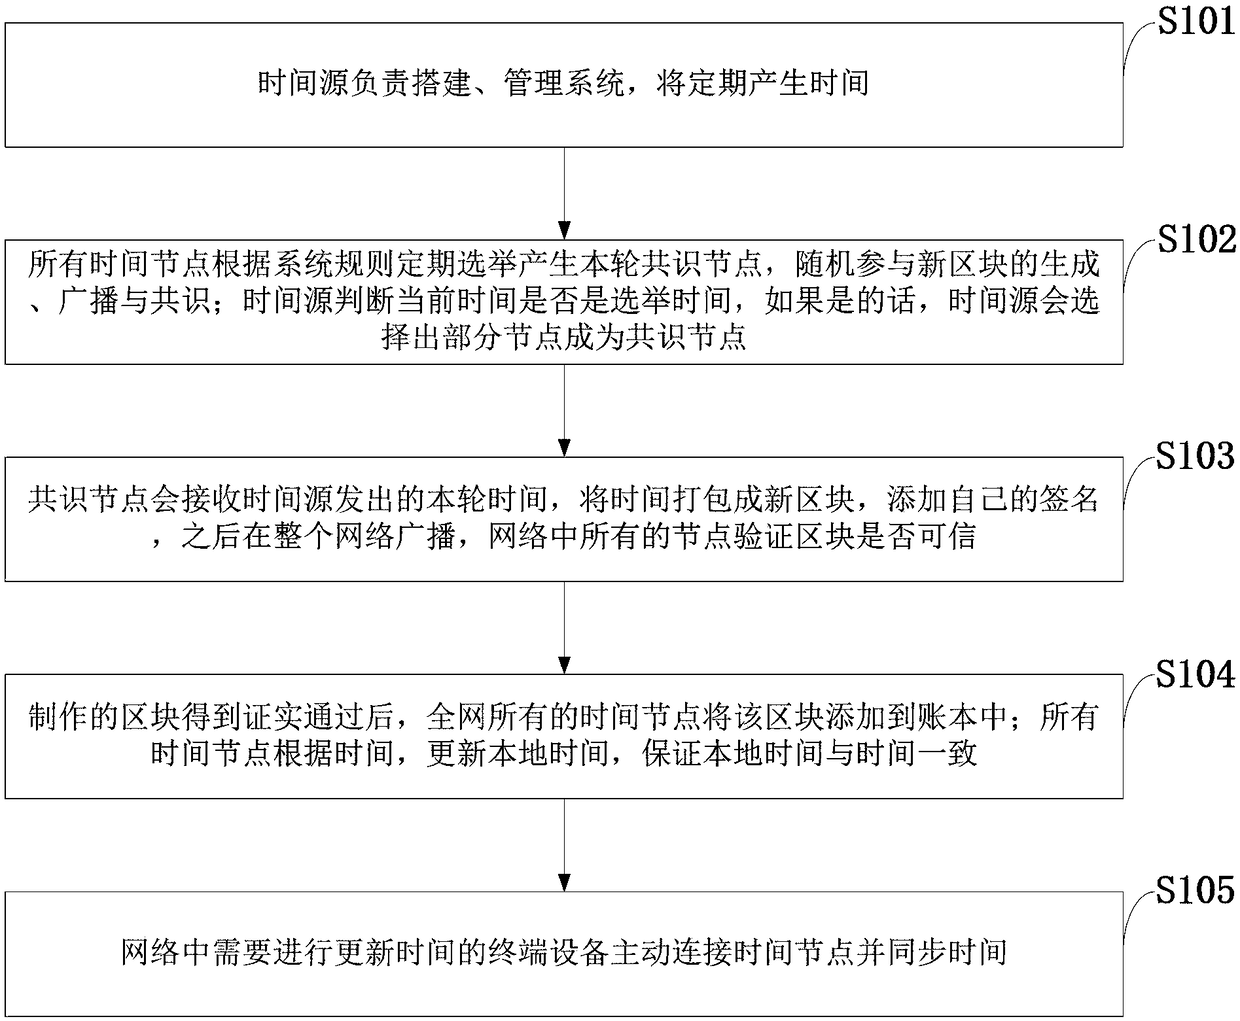 Blockchain-based time distribution and synchronization method and system, and data processing system